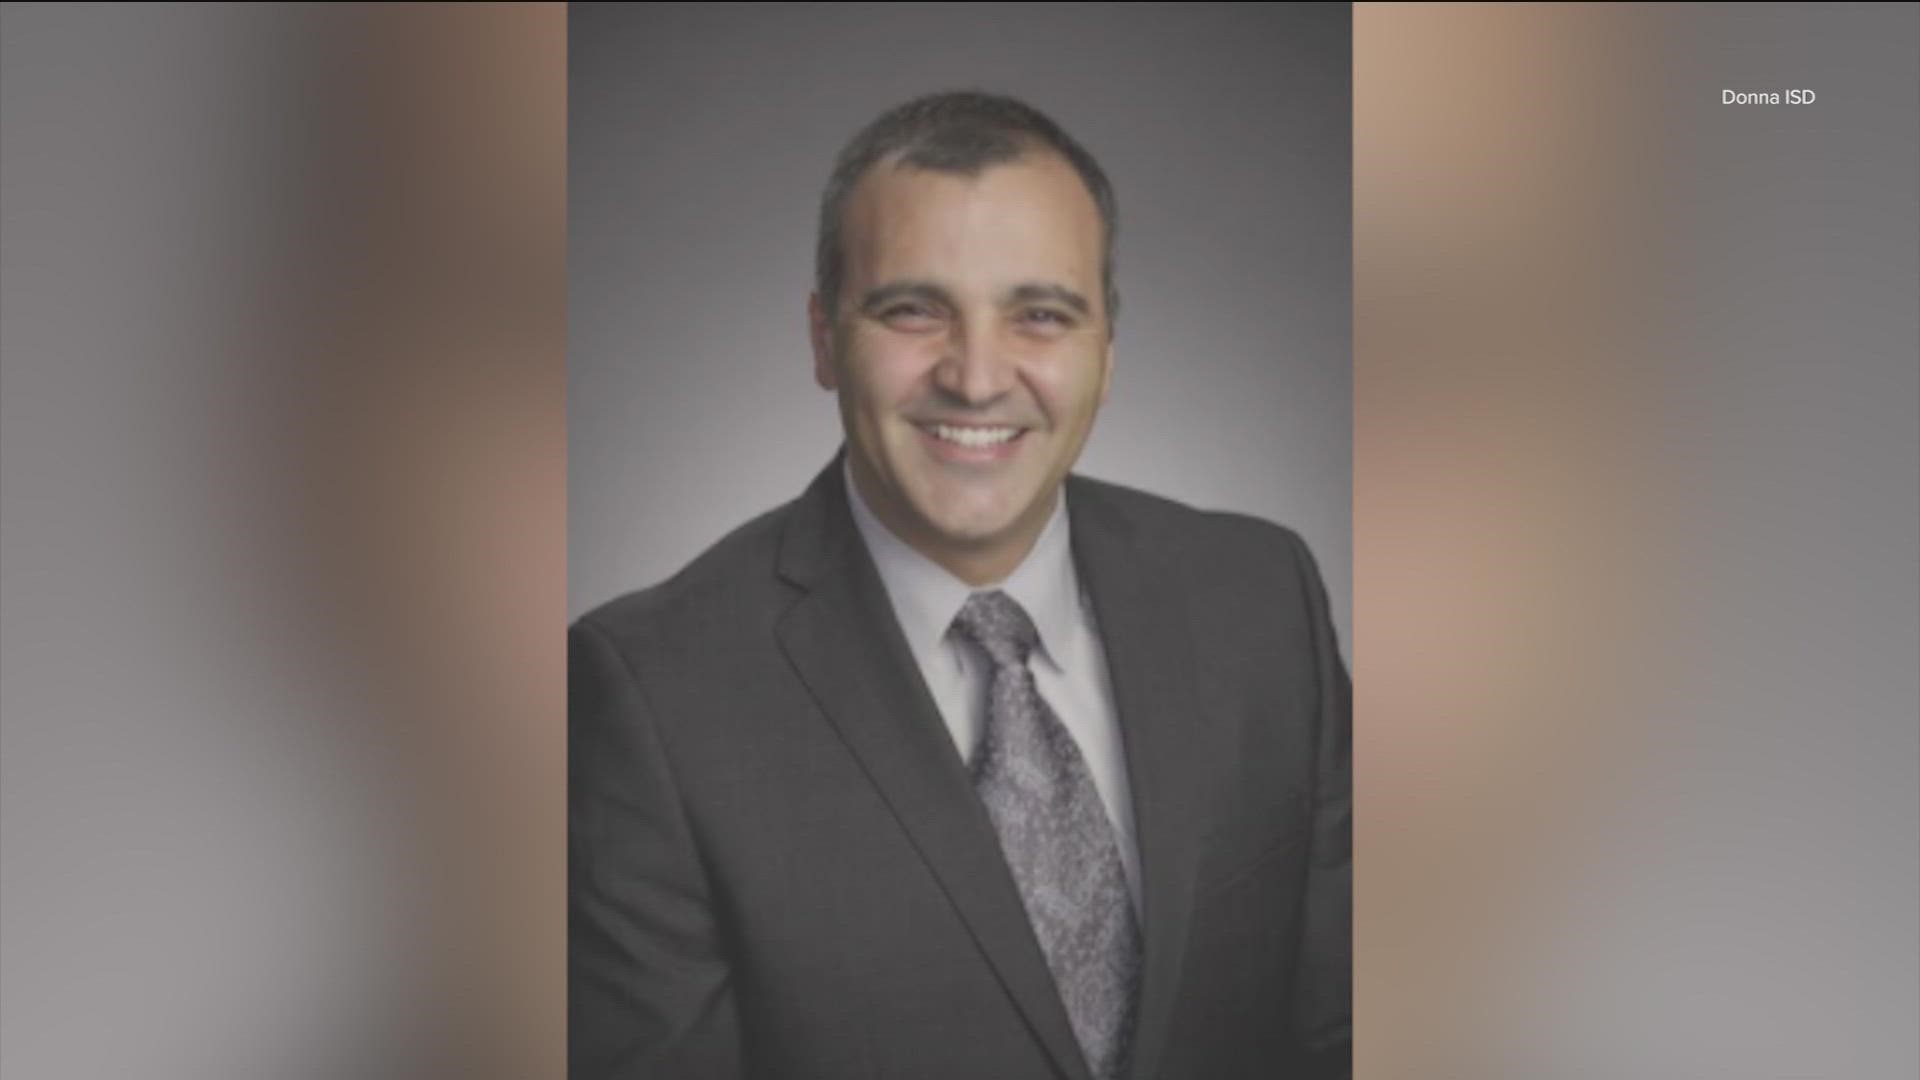 An investigation into Round Rock ISD Superintendent Hafedh Azaiez has come to light, reporting he should not have been reinstated as leader of the district.